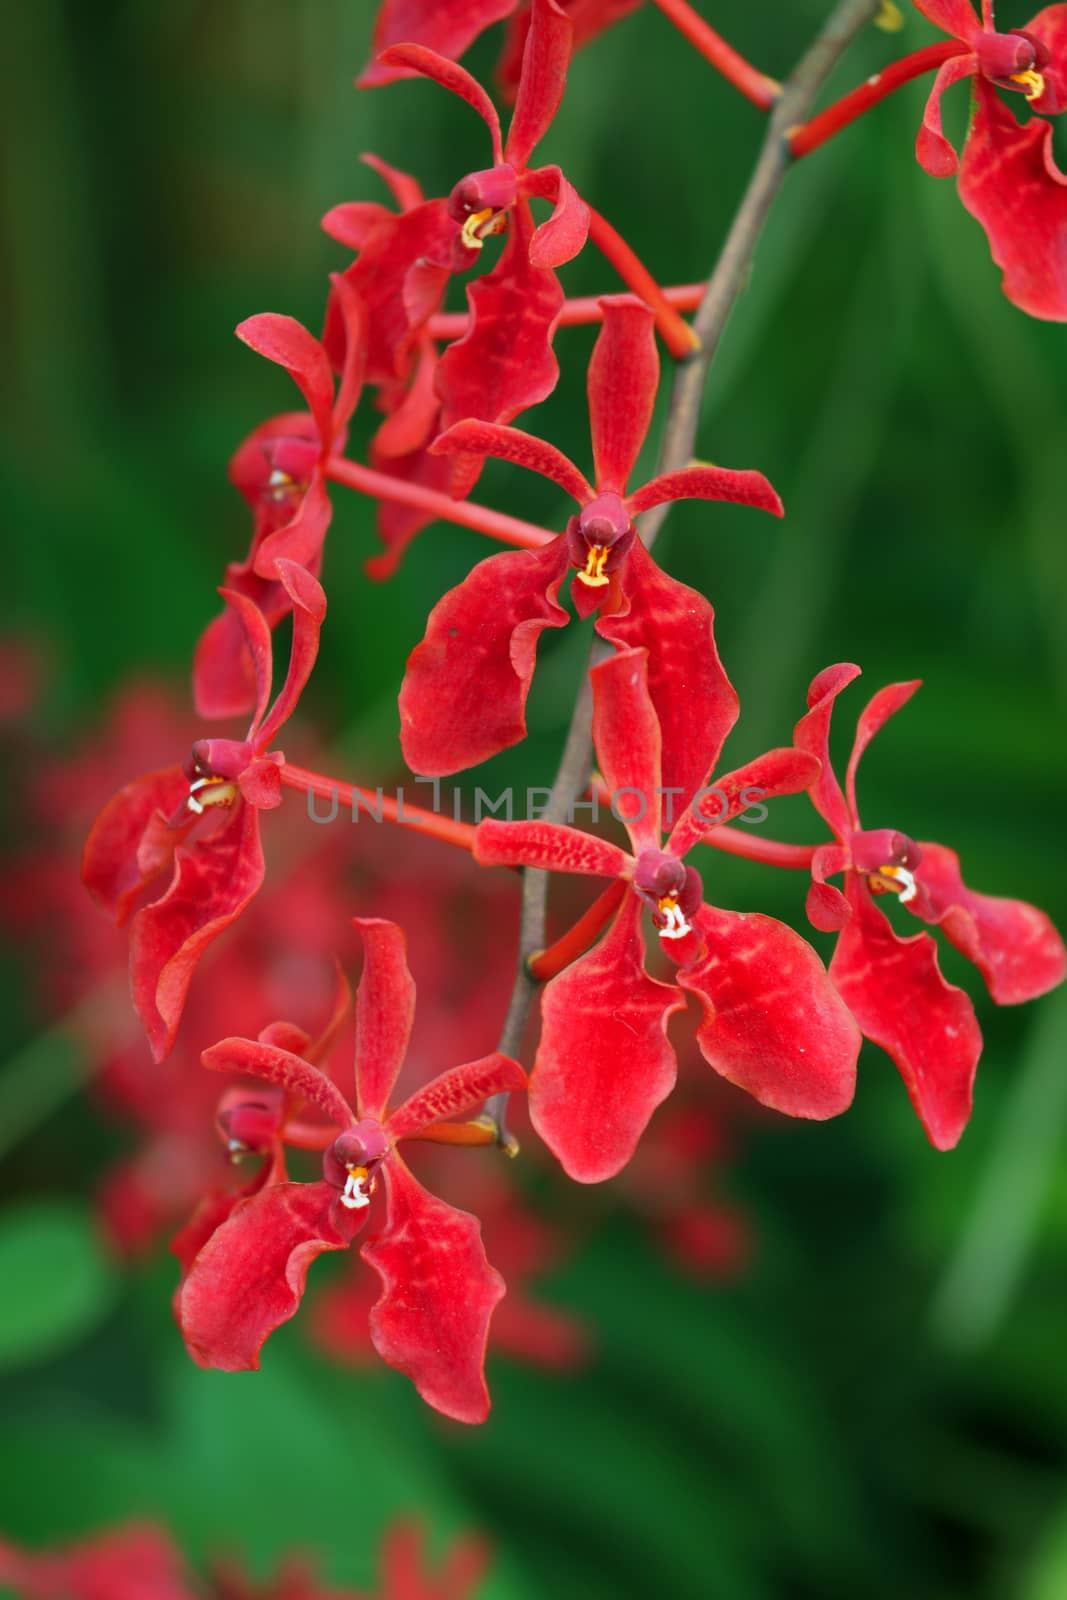 Red orchid